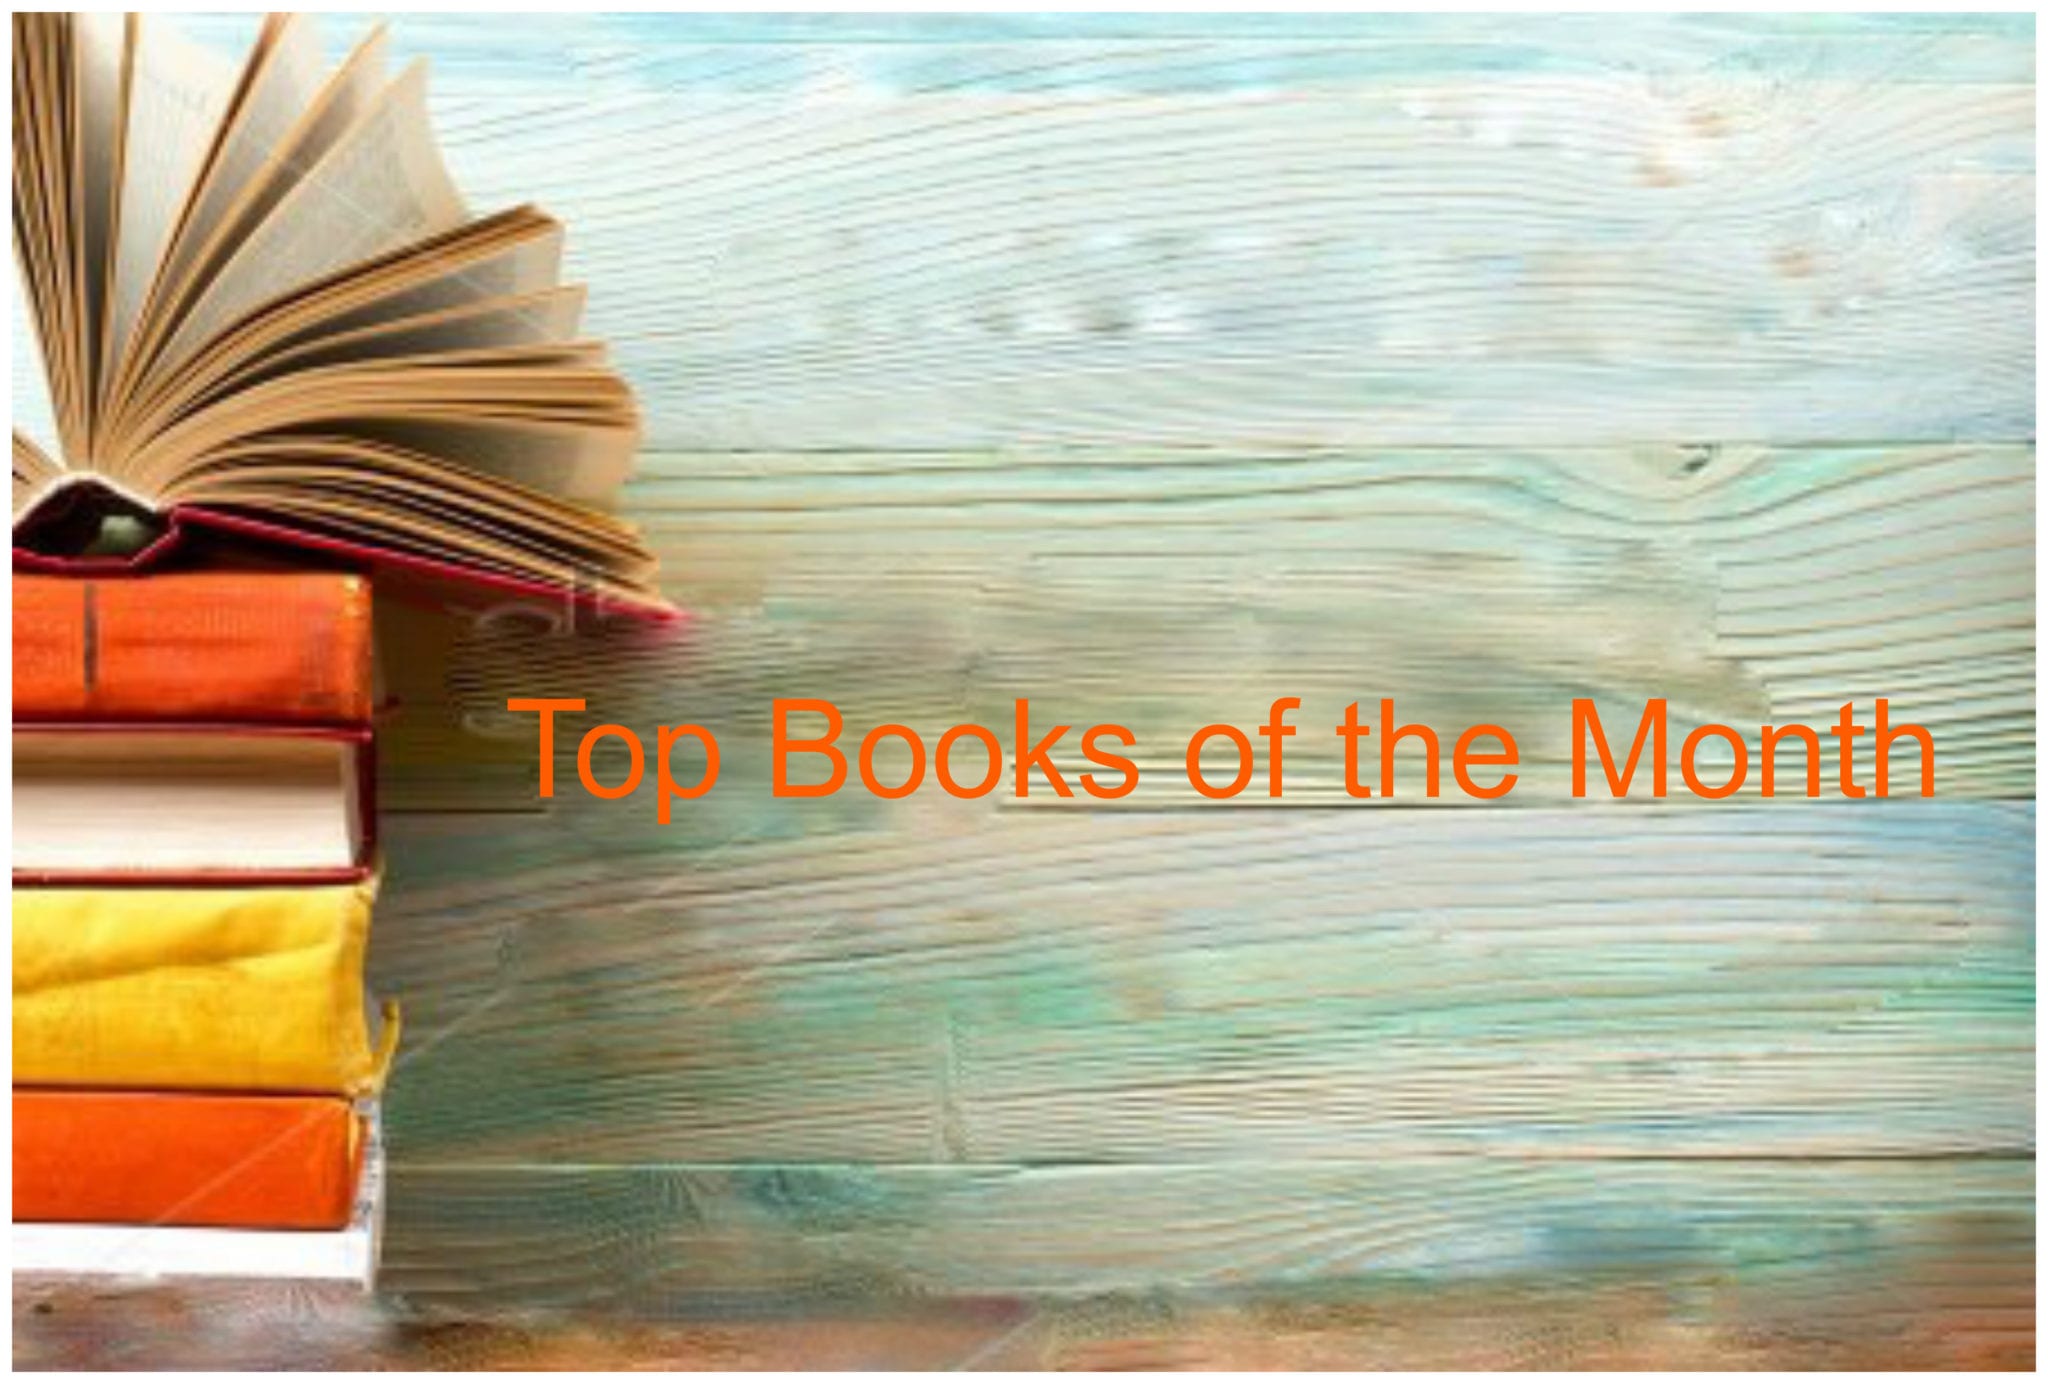 books lists, best books of the month, top books 2018, best fiction books, best nonfiction books, must read books